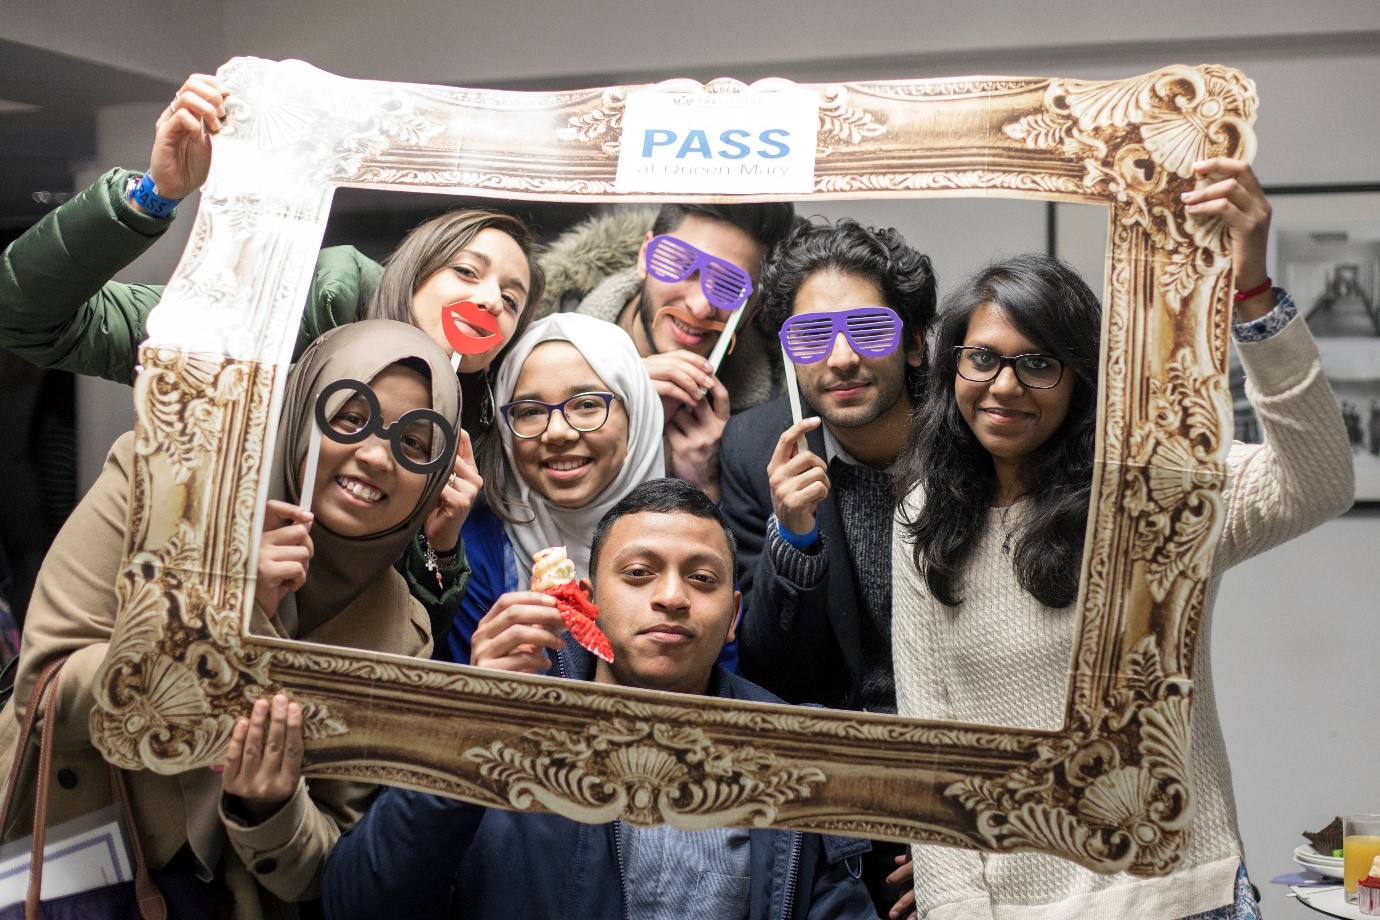 PASS Students - students holding cardboard picture frame, with student faces appearing as picture.